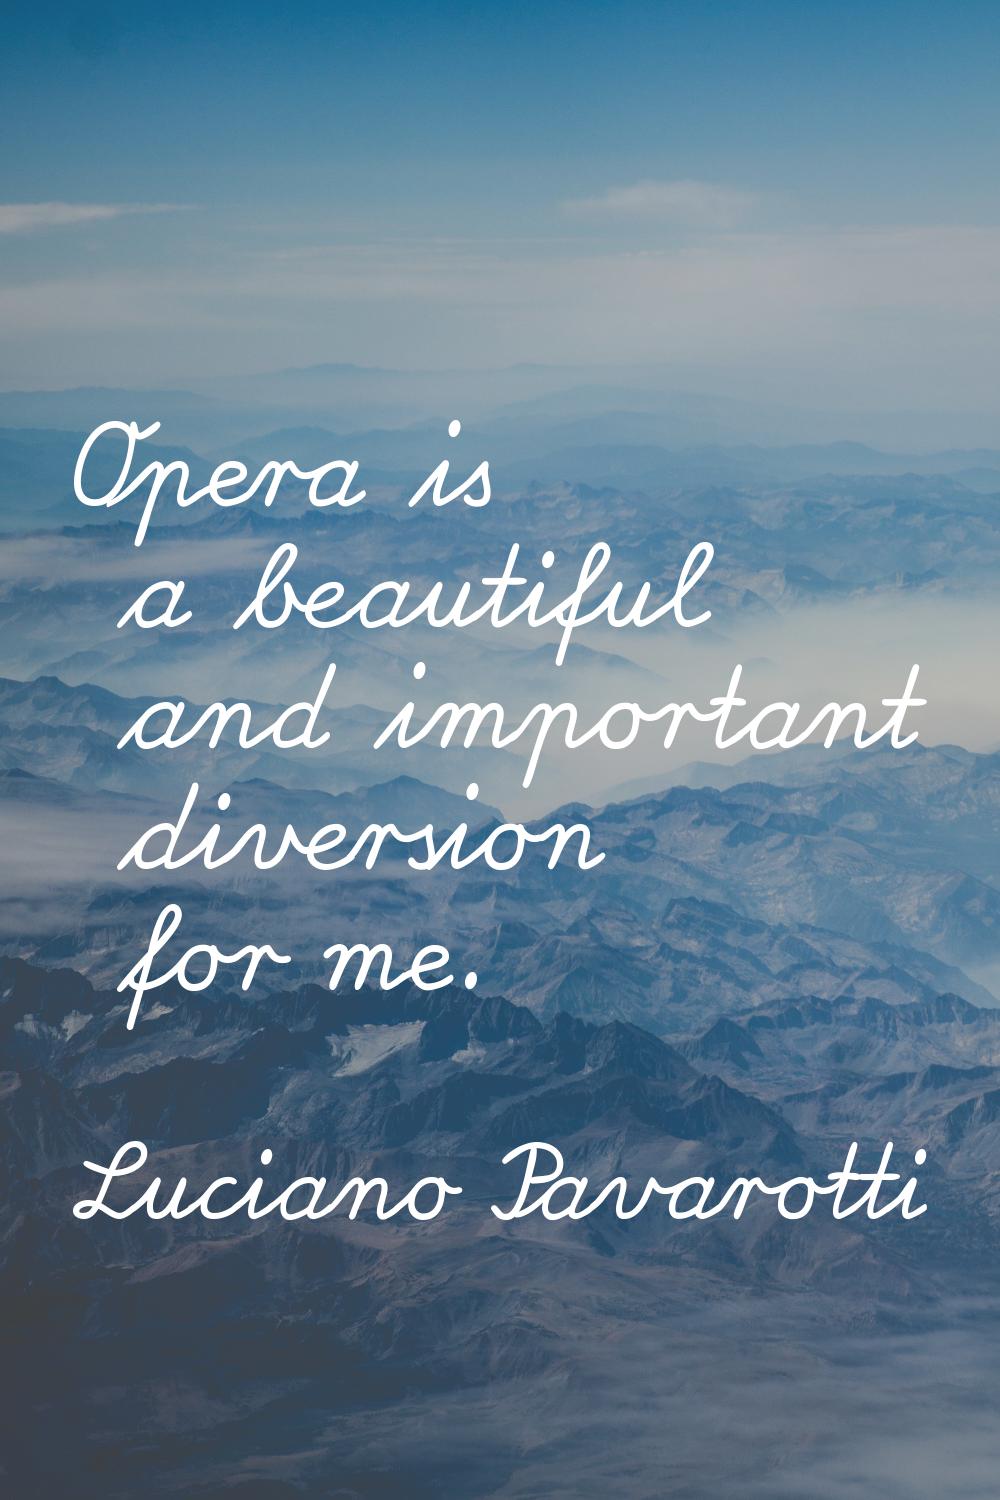 Opera is a beautiful and important diversion for me.